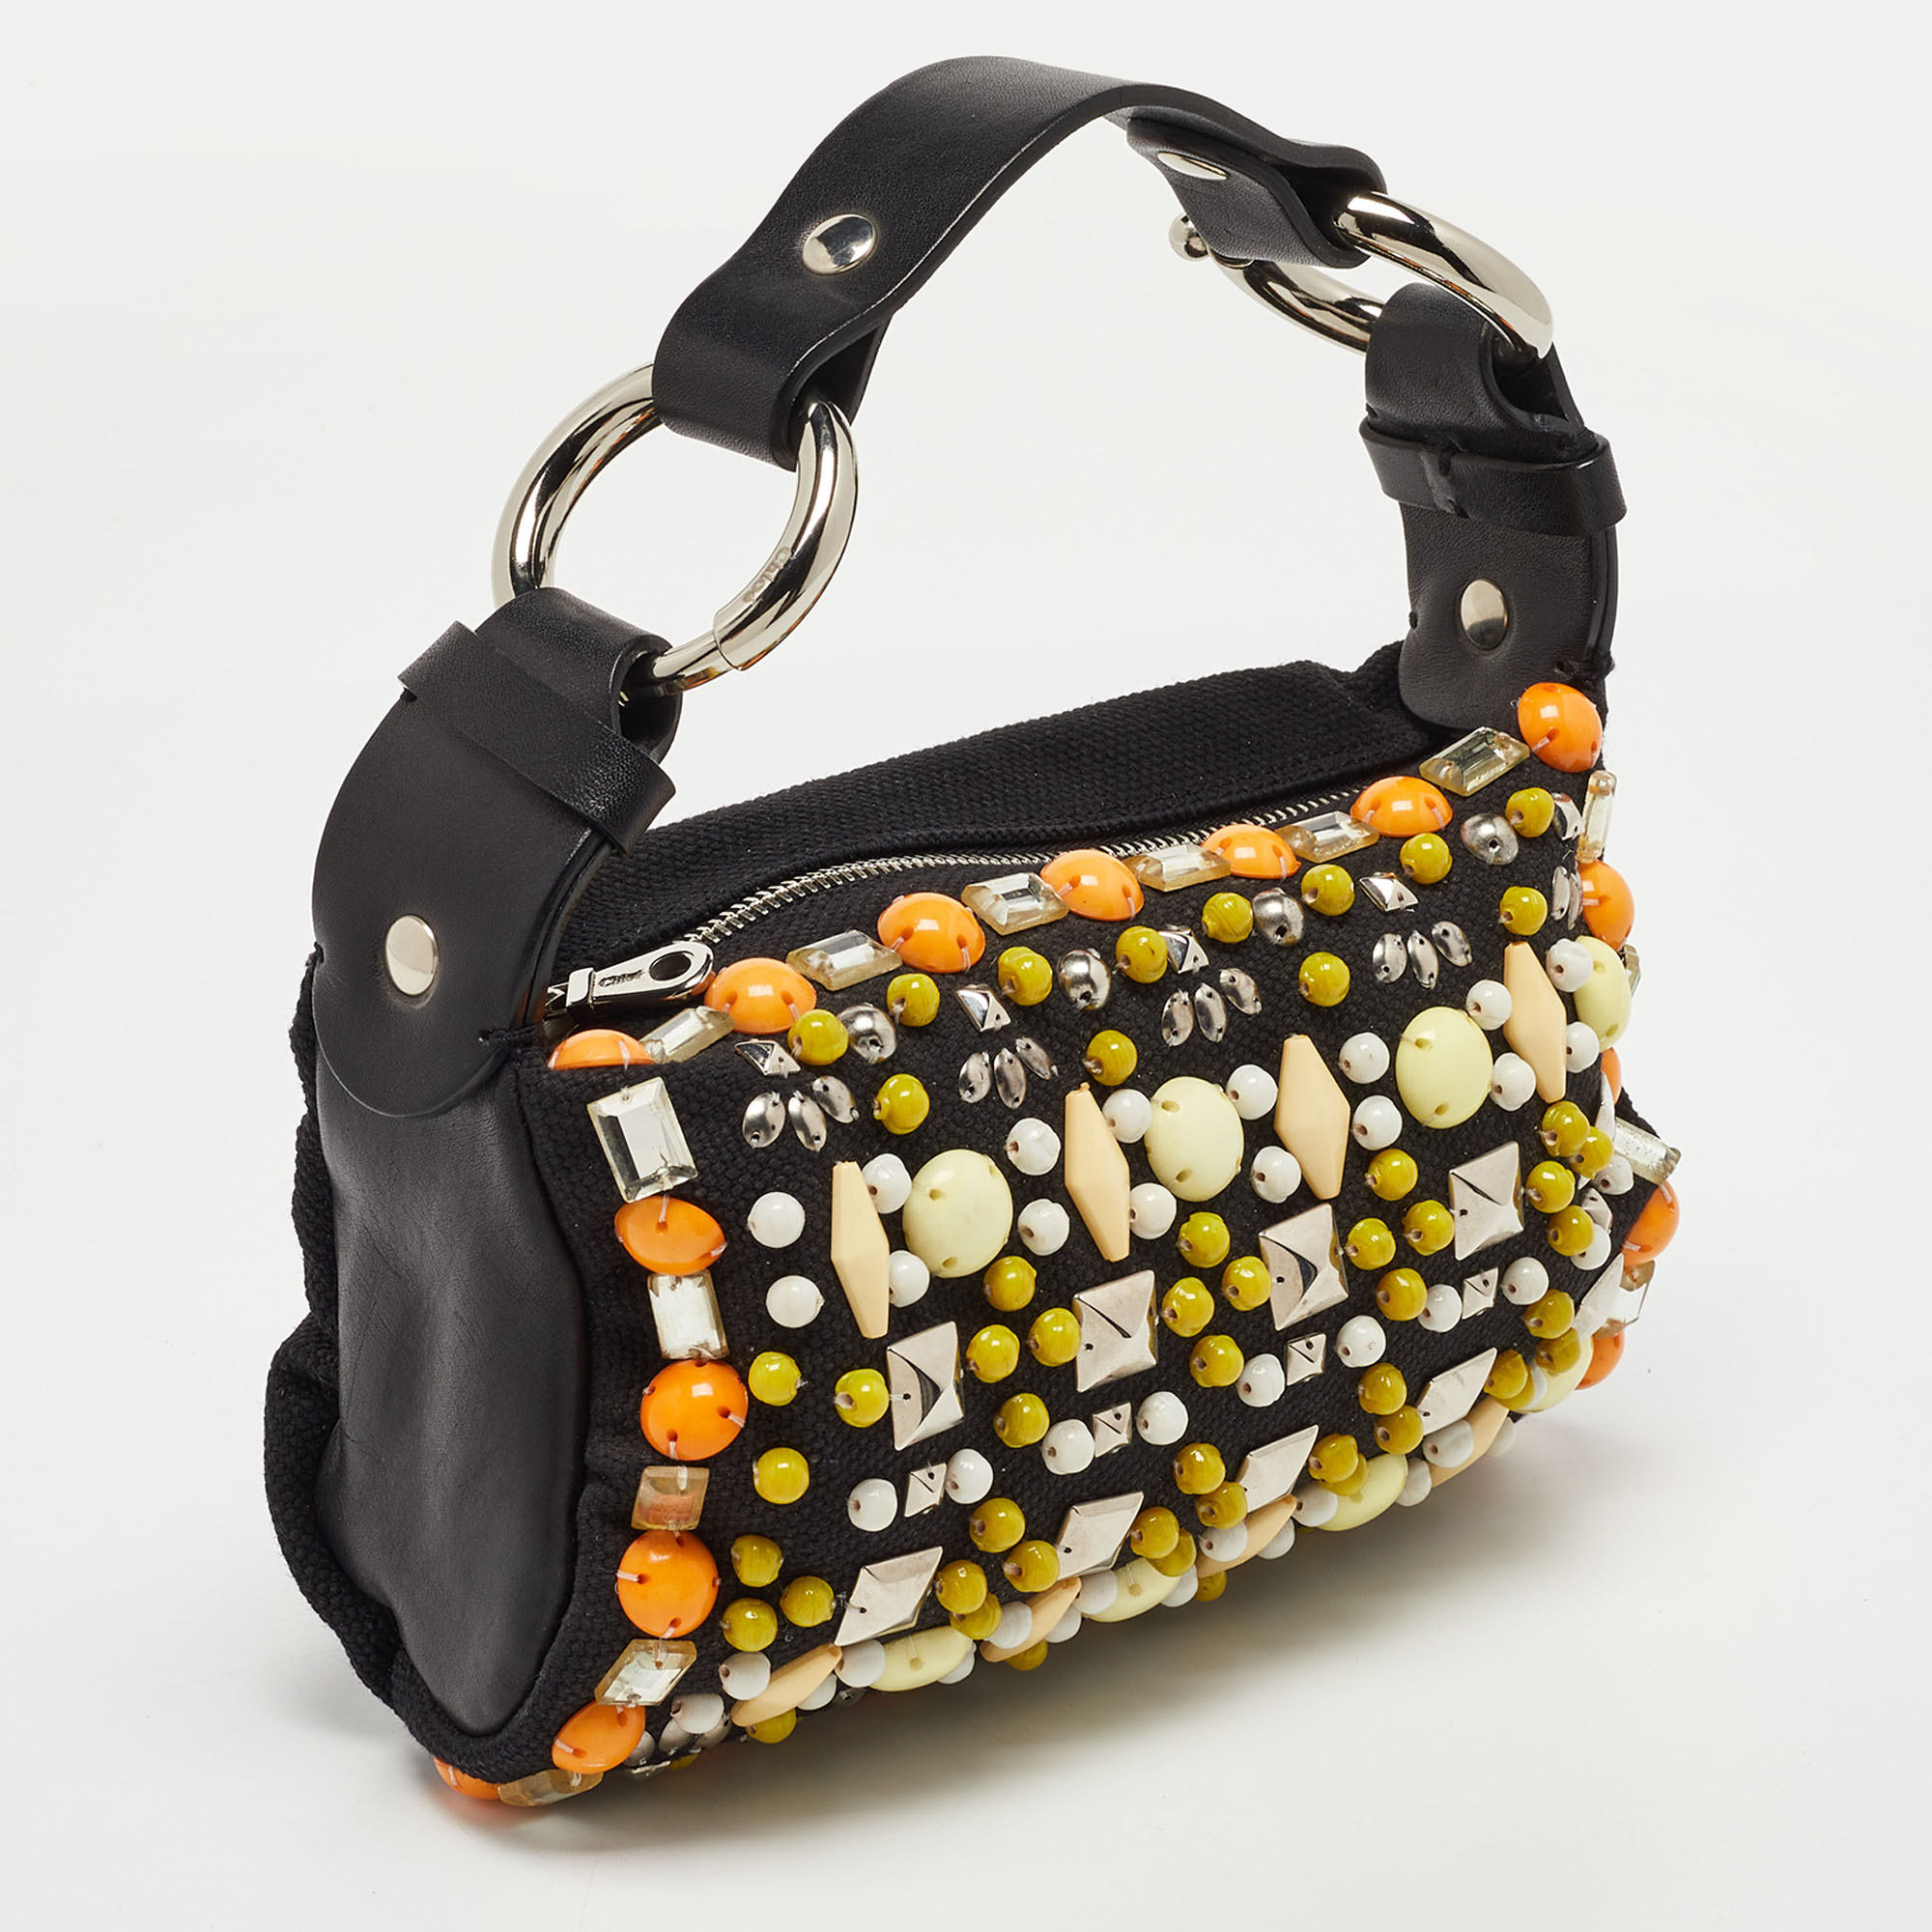 Chloe Black Canvas And Leather Embellished Ring Handle Hobo